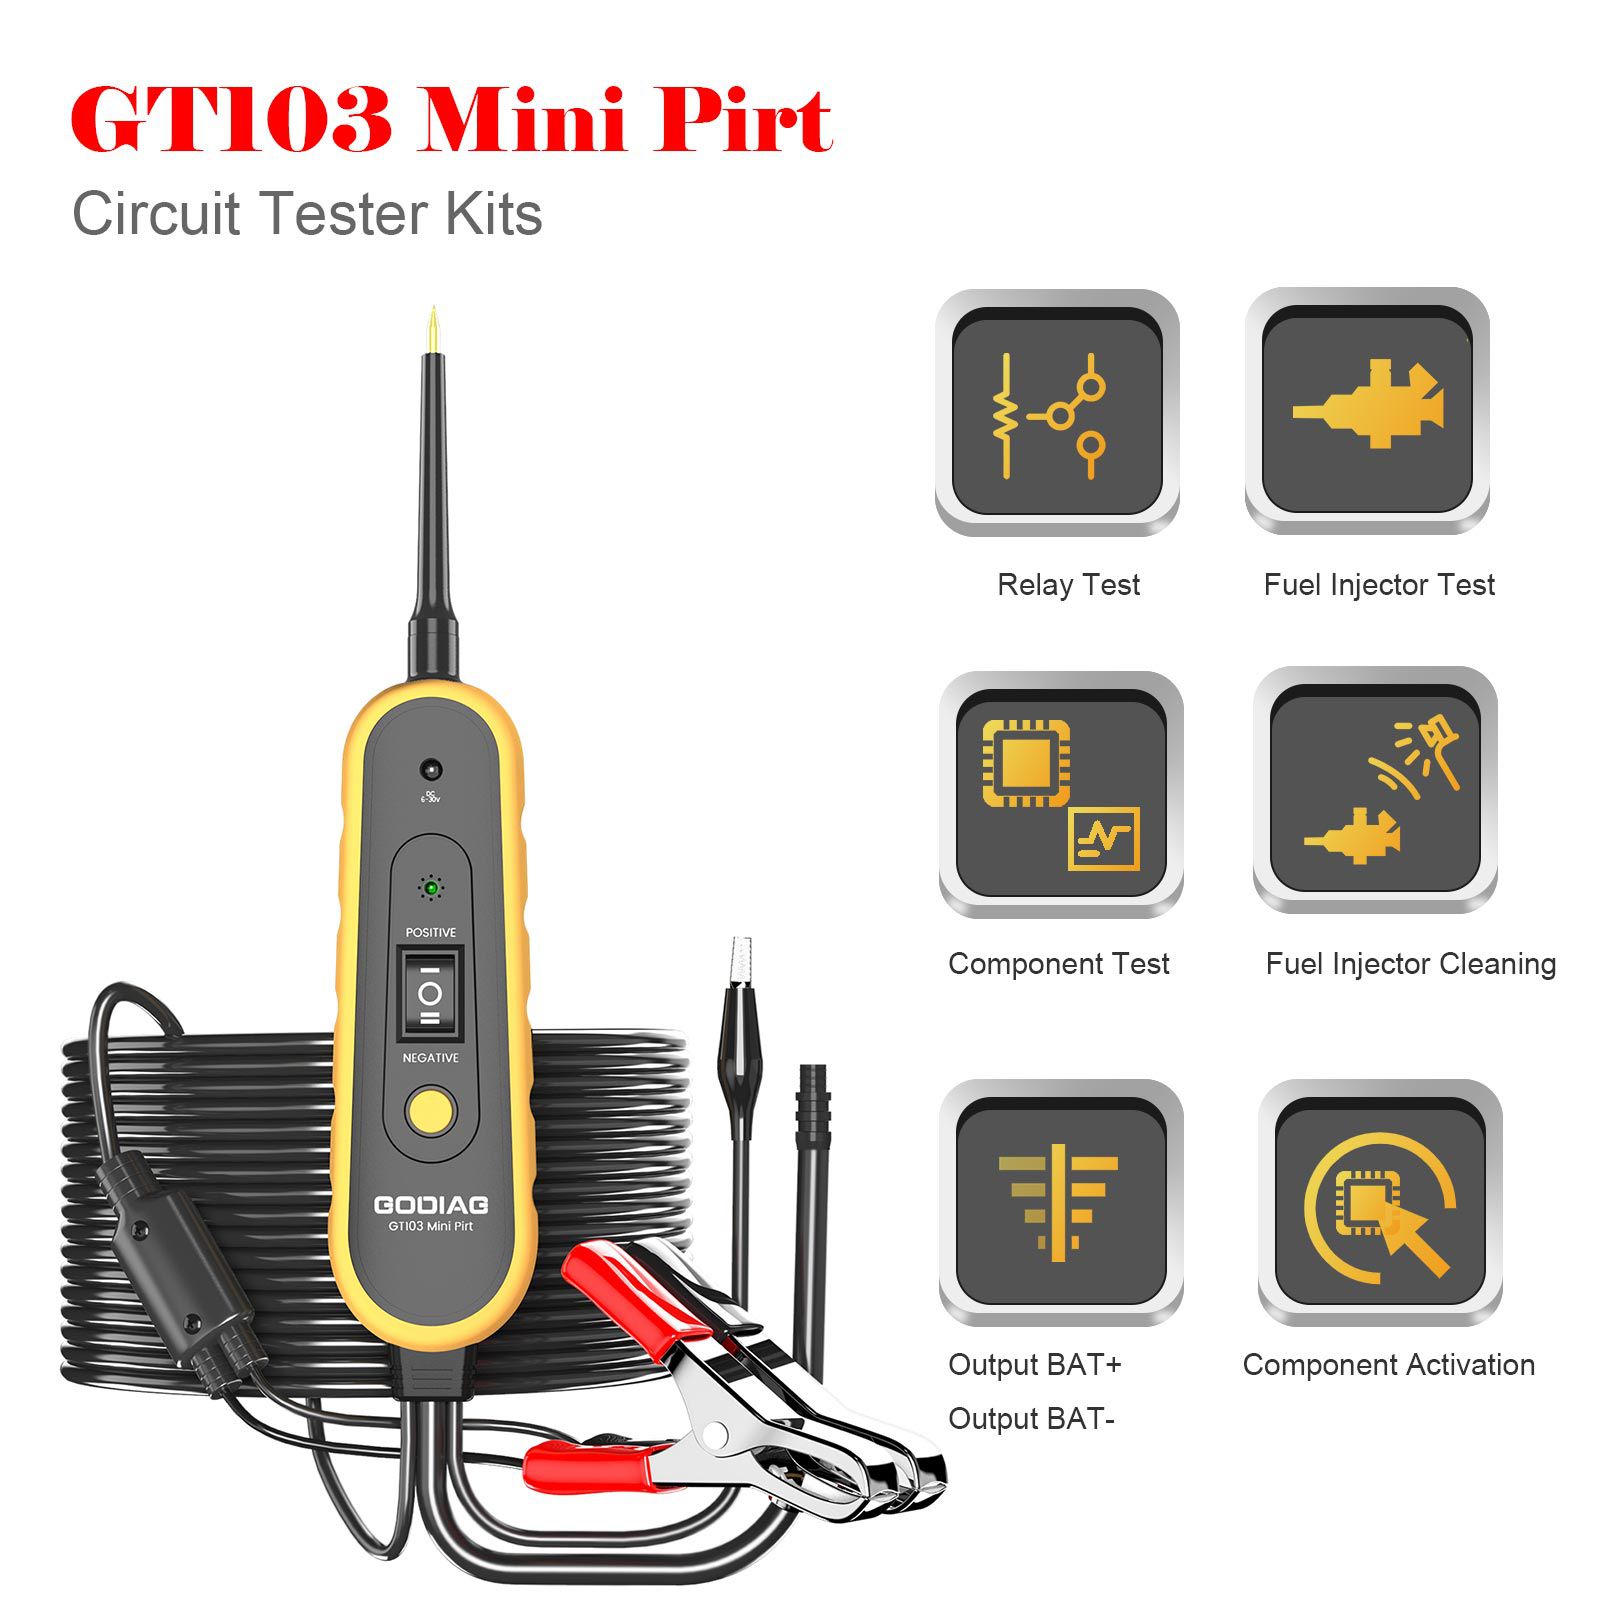 Godiag gt103 micro pirt circuit Test Vehicle Electrical System Diagnosis / inyectors Cleaning and test / Relay test